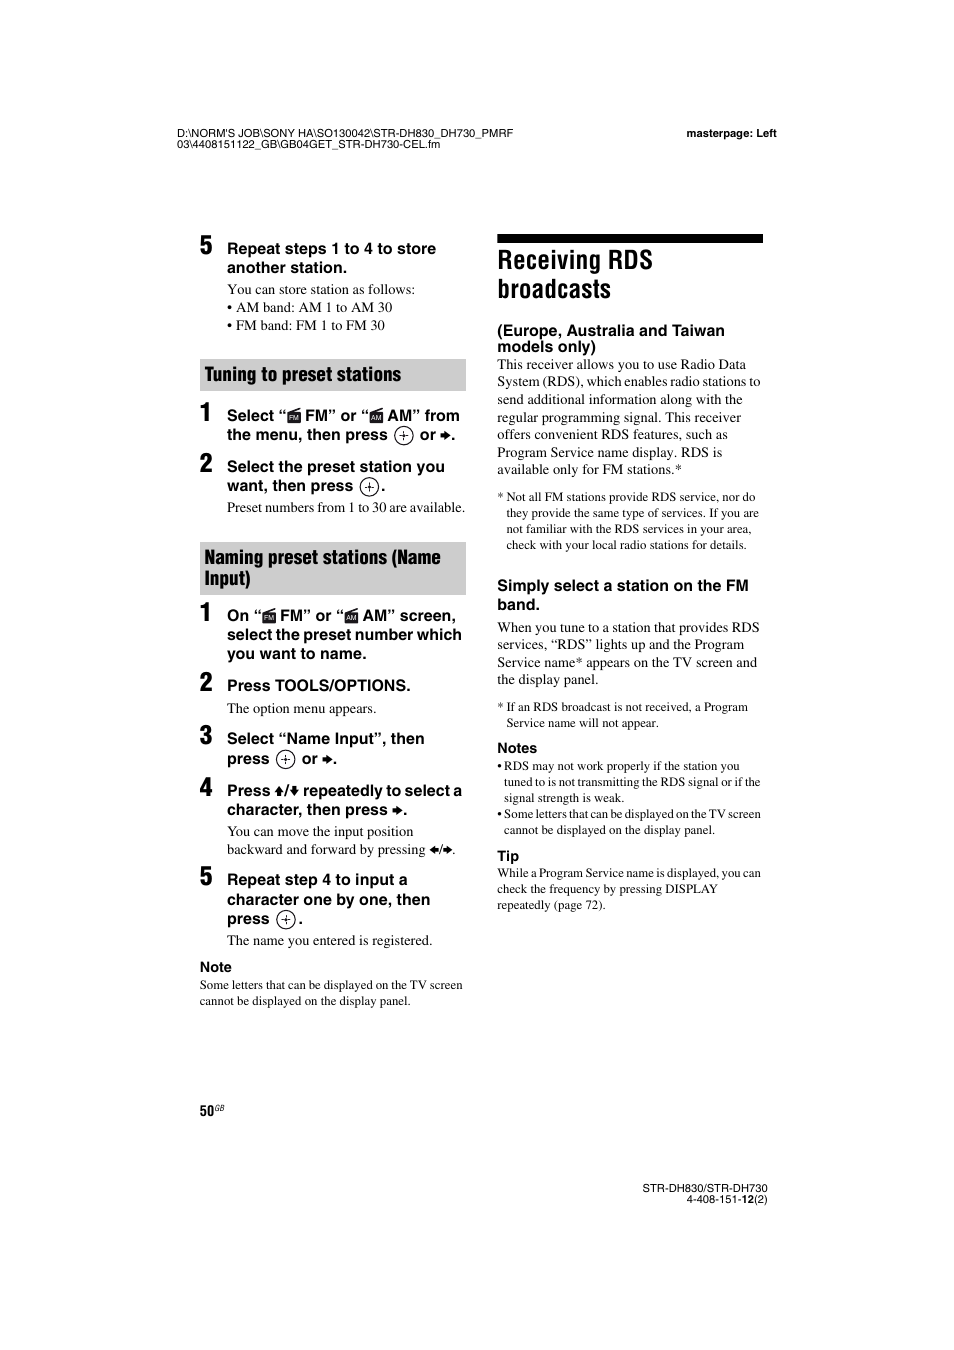 Receiving rds broadcasts, Europe, australia and taiwan models only) | Sony STRDH830 User Manual | Page 50 / 88